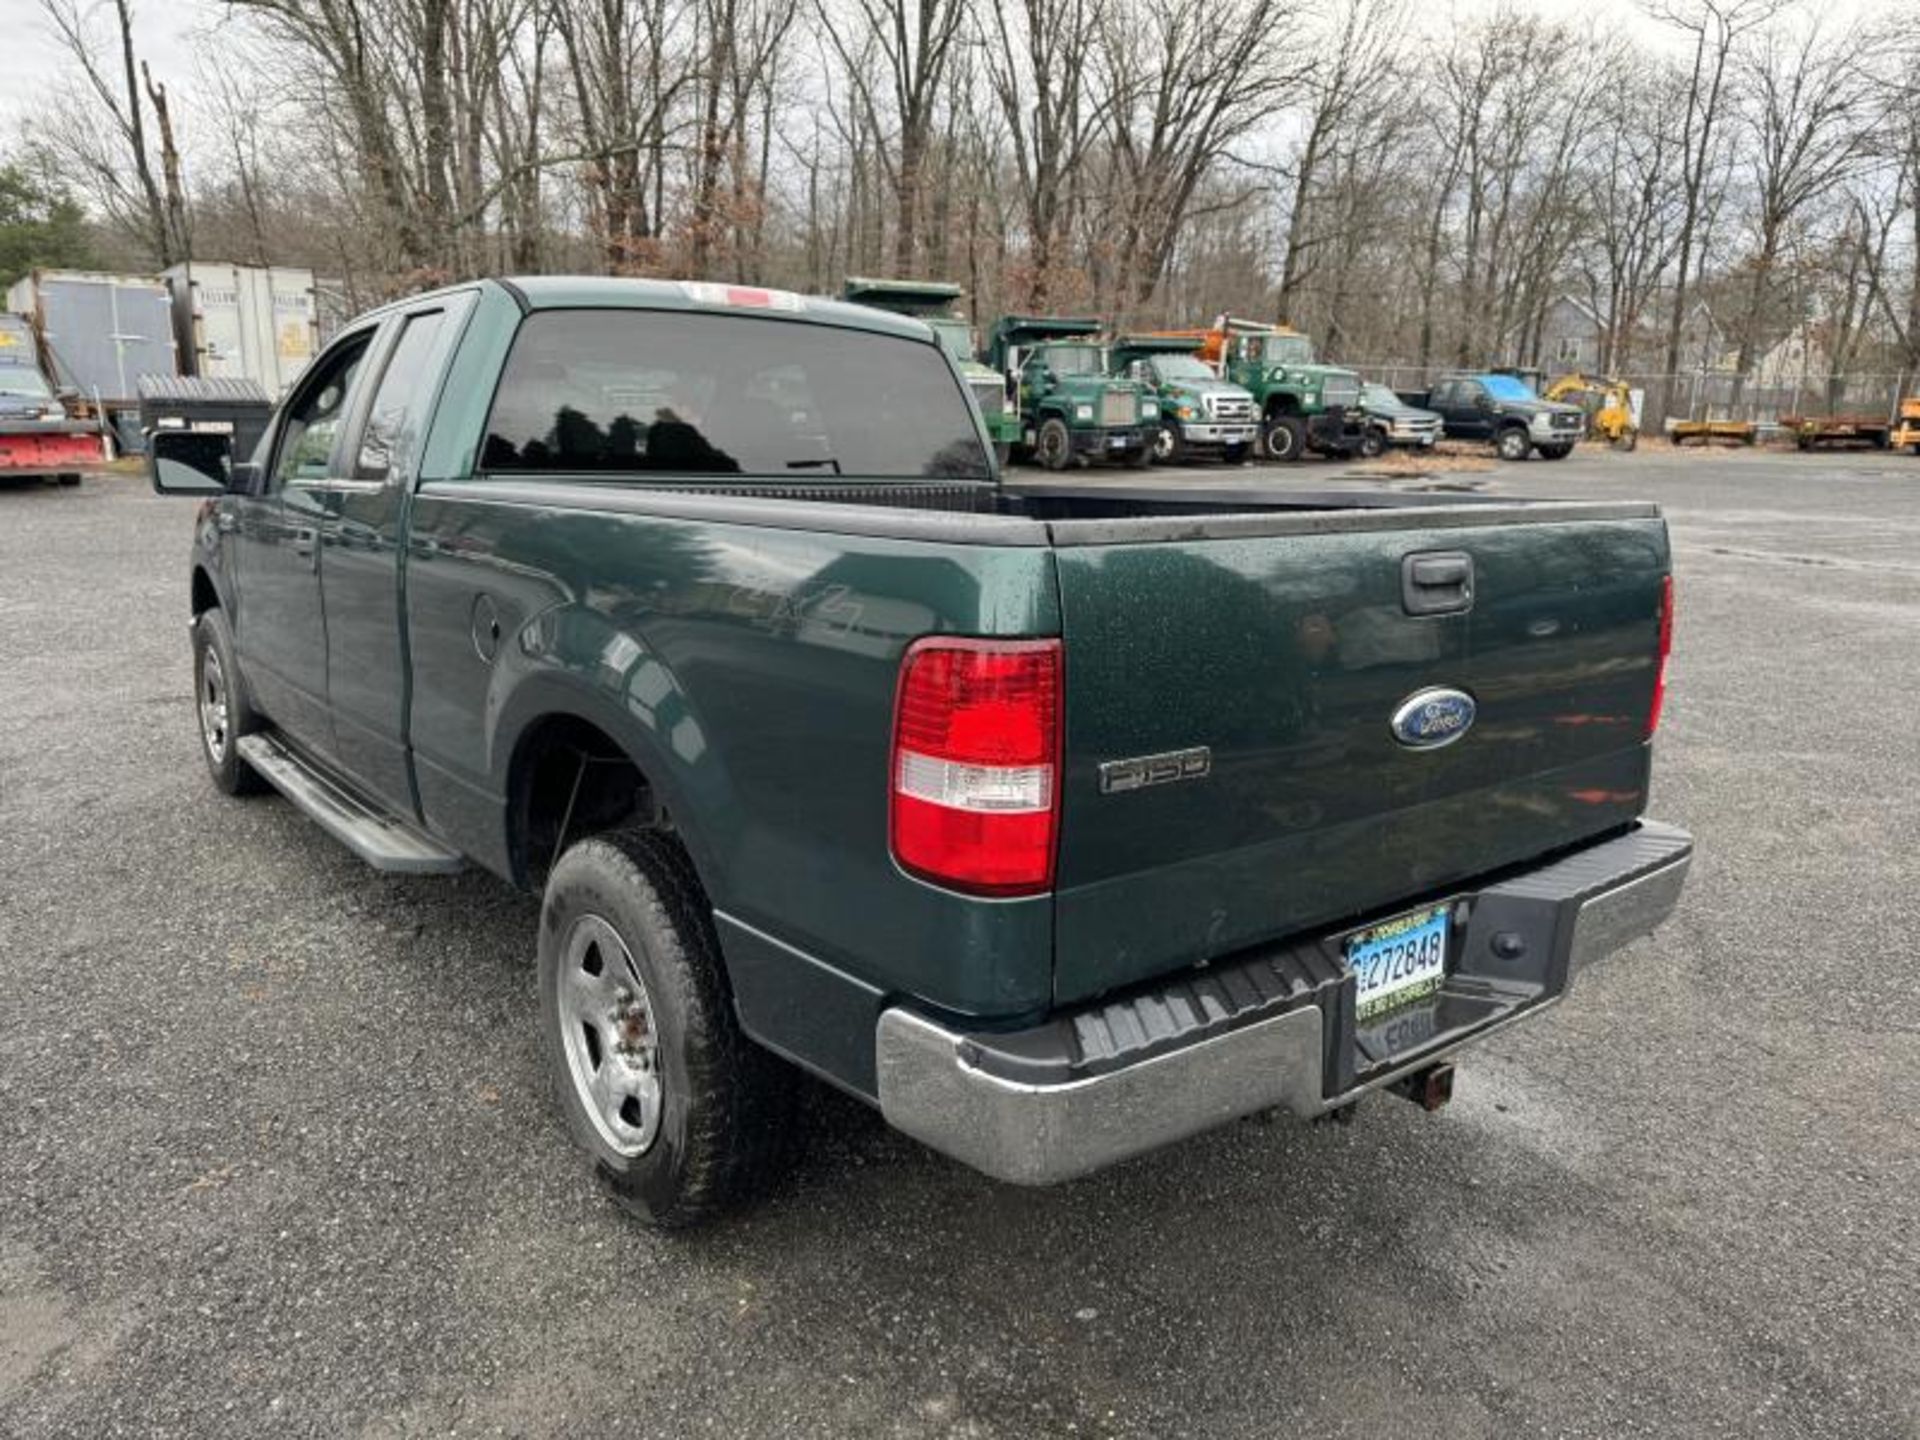 2007 Ford F-150 4x4 Pick Up Truck with 122,621 Mil 2007 Ford F-150 4x4 Pick Up Truck with 122,621 Mi - Image 3 of 11